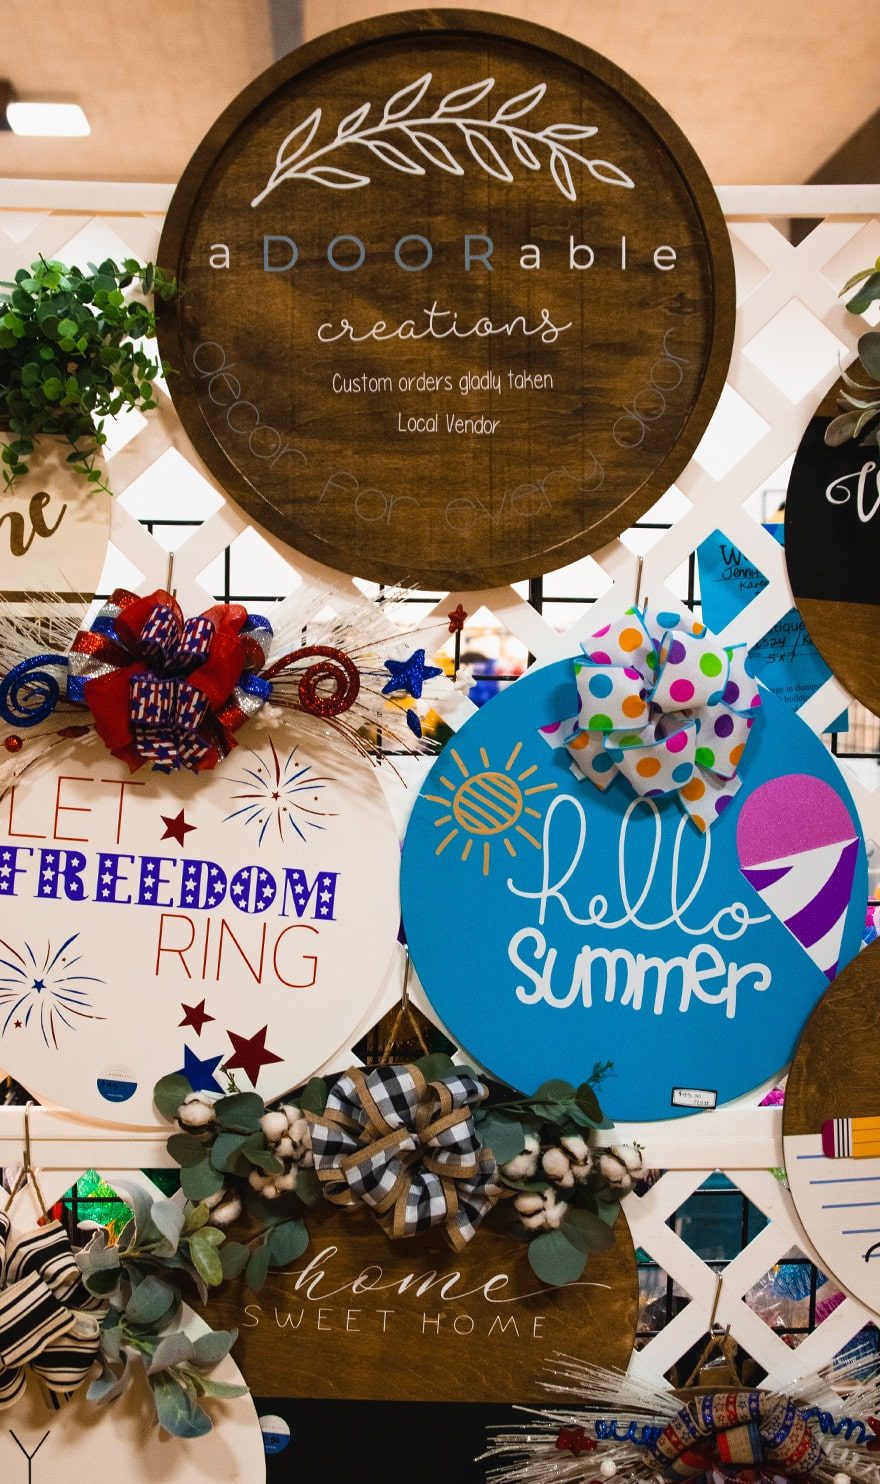 Round handmade wooden door signs are hung on a white trellis in the aDOORable creations booth.